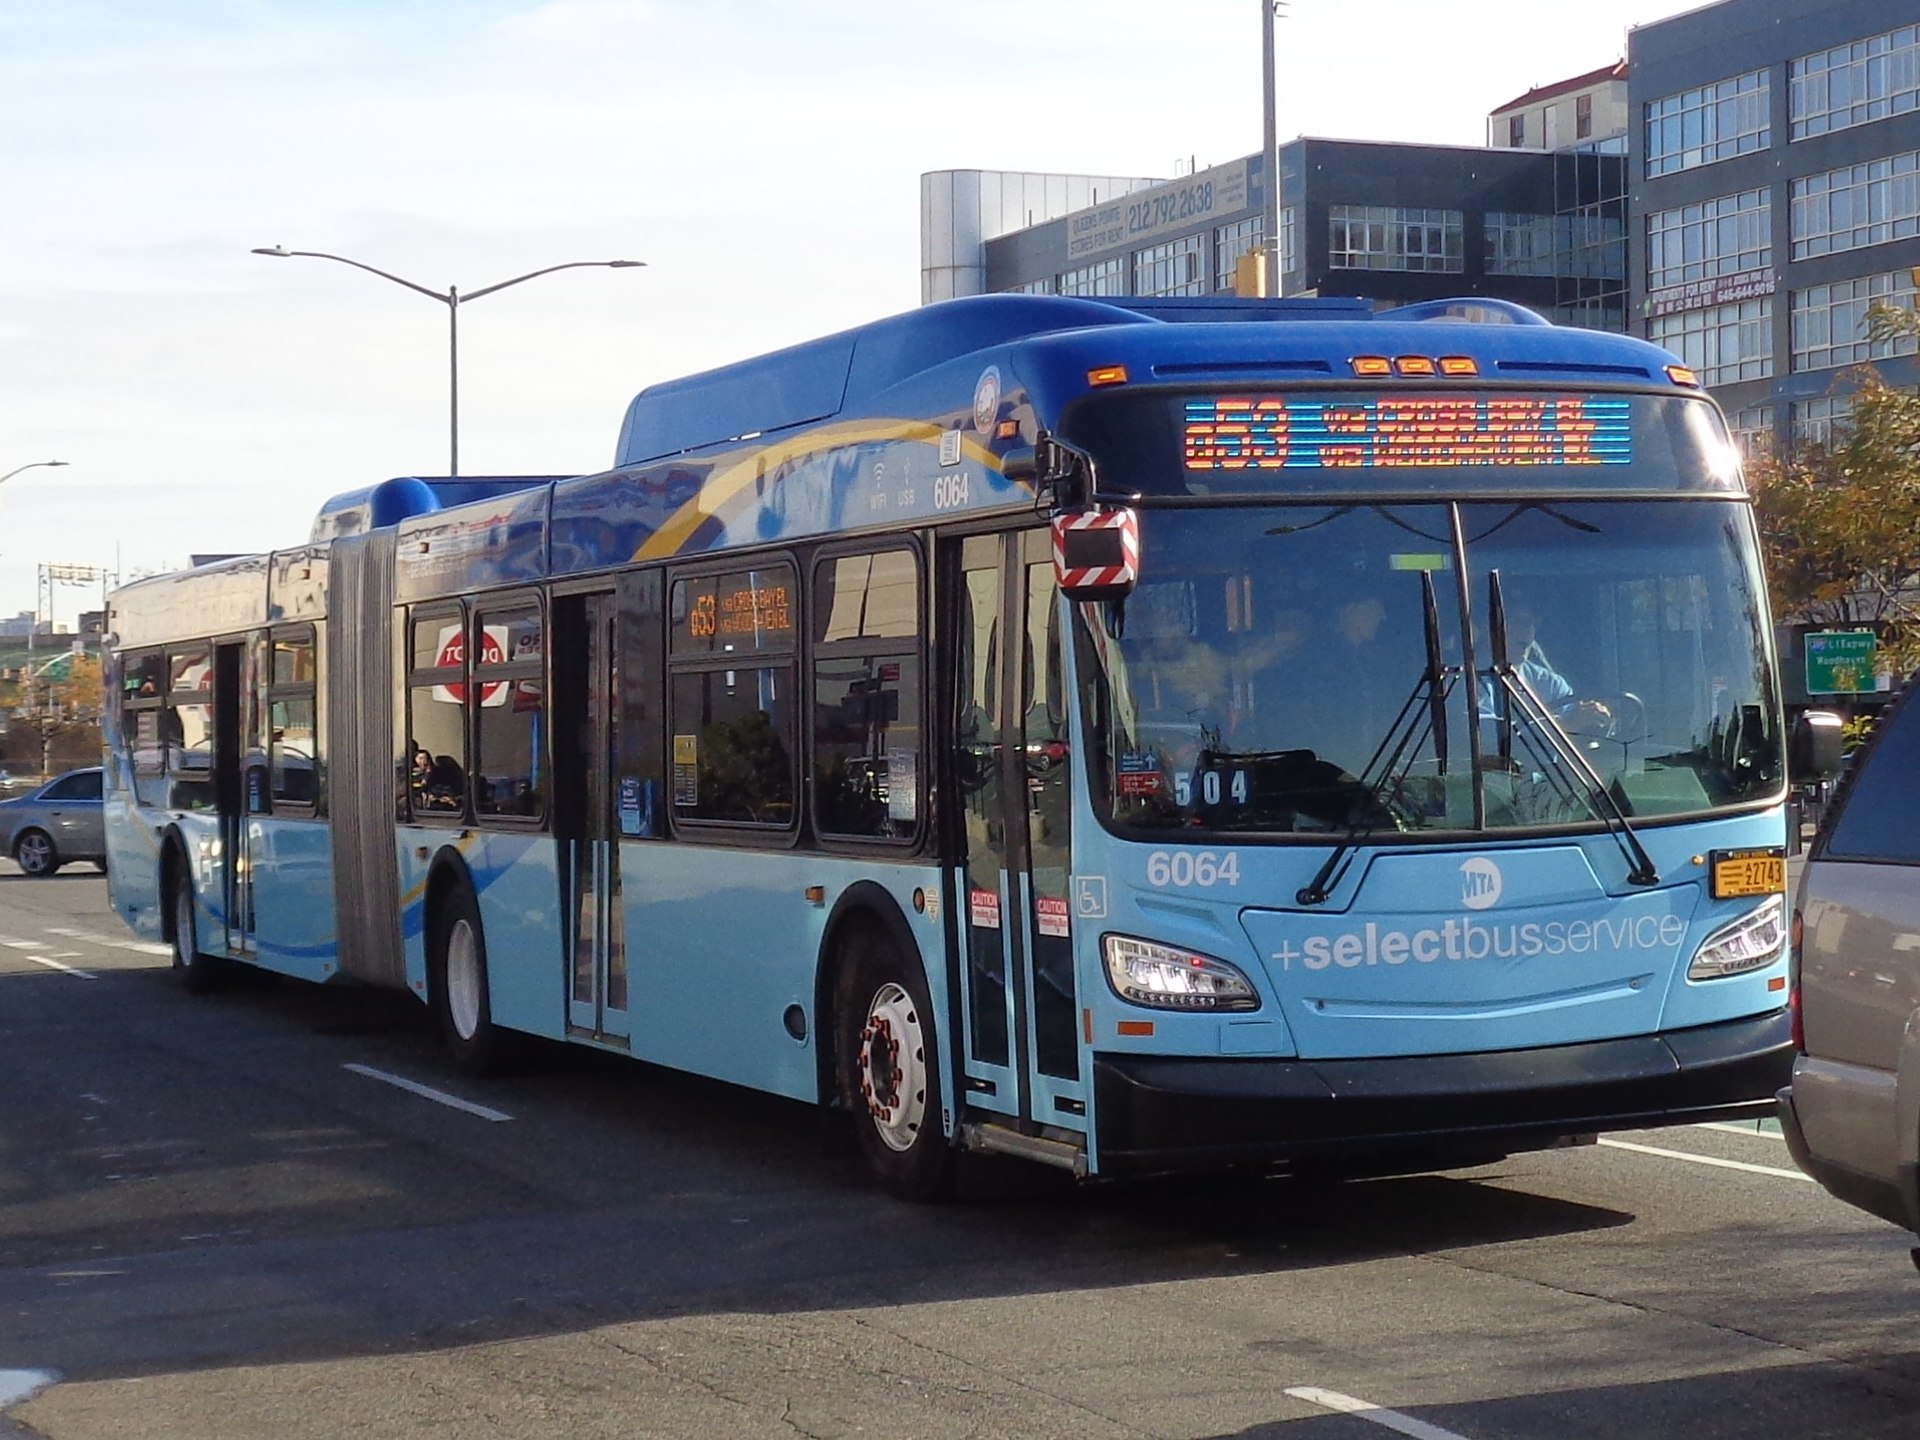 The Q53 select bus, which runs along Woodhaven Boulevard and Cross Bay Boulevard.